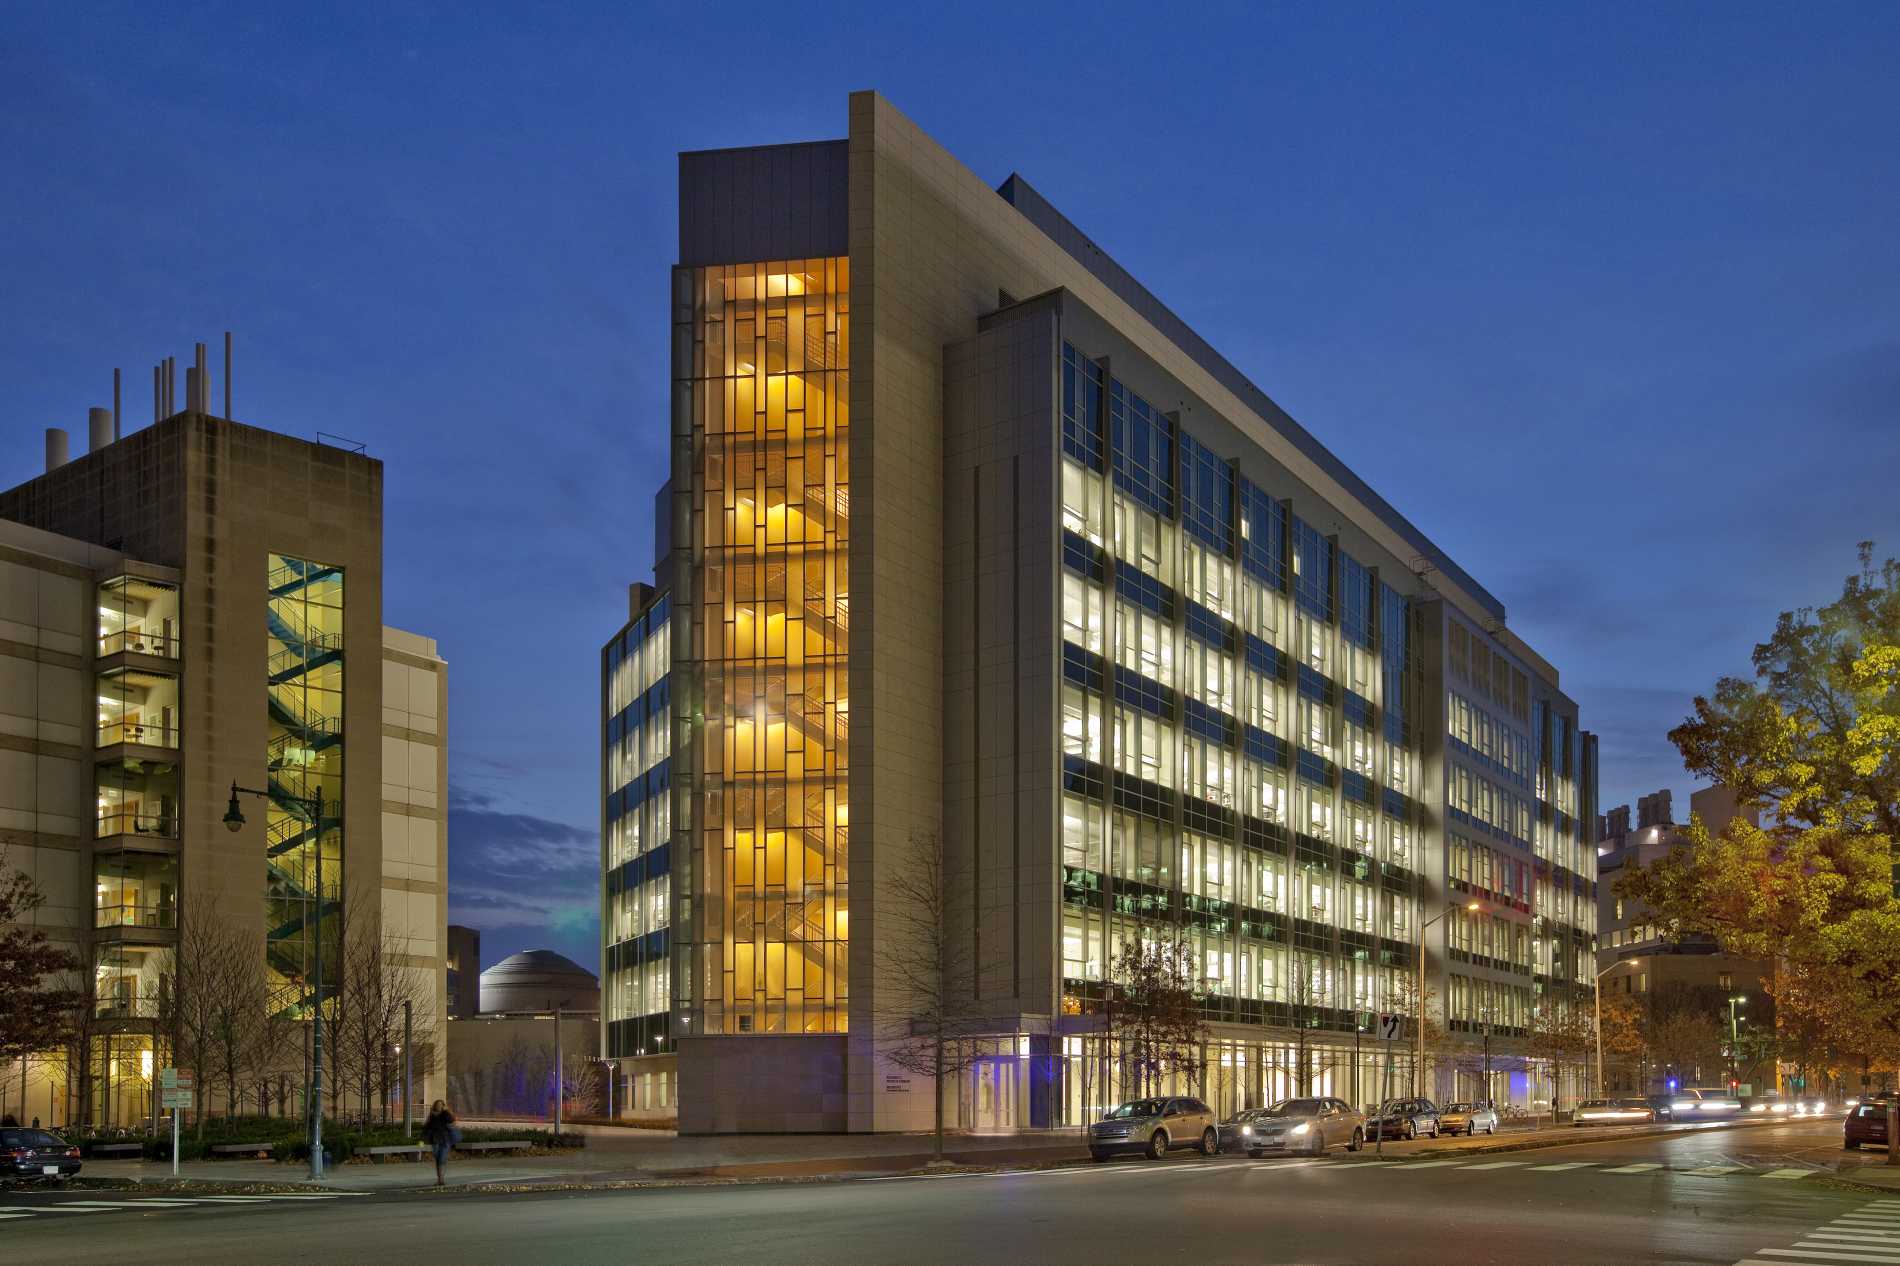 External night view Koch Institute for Integrative Cancer Research at MIT